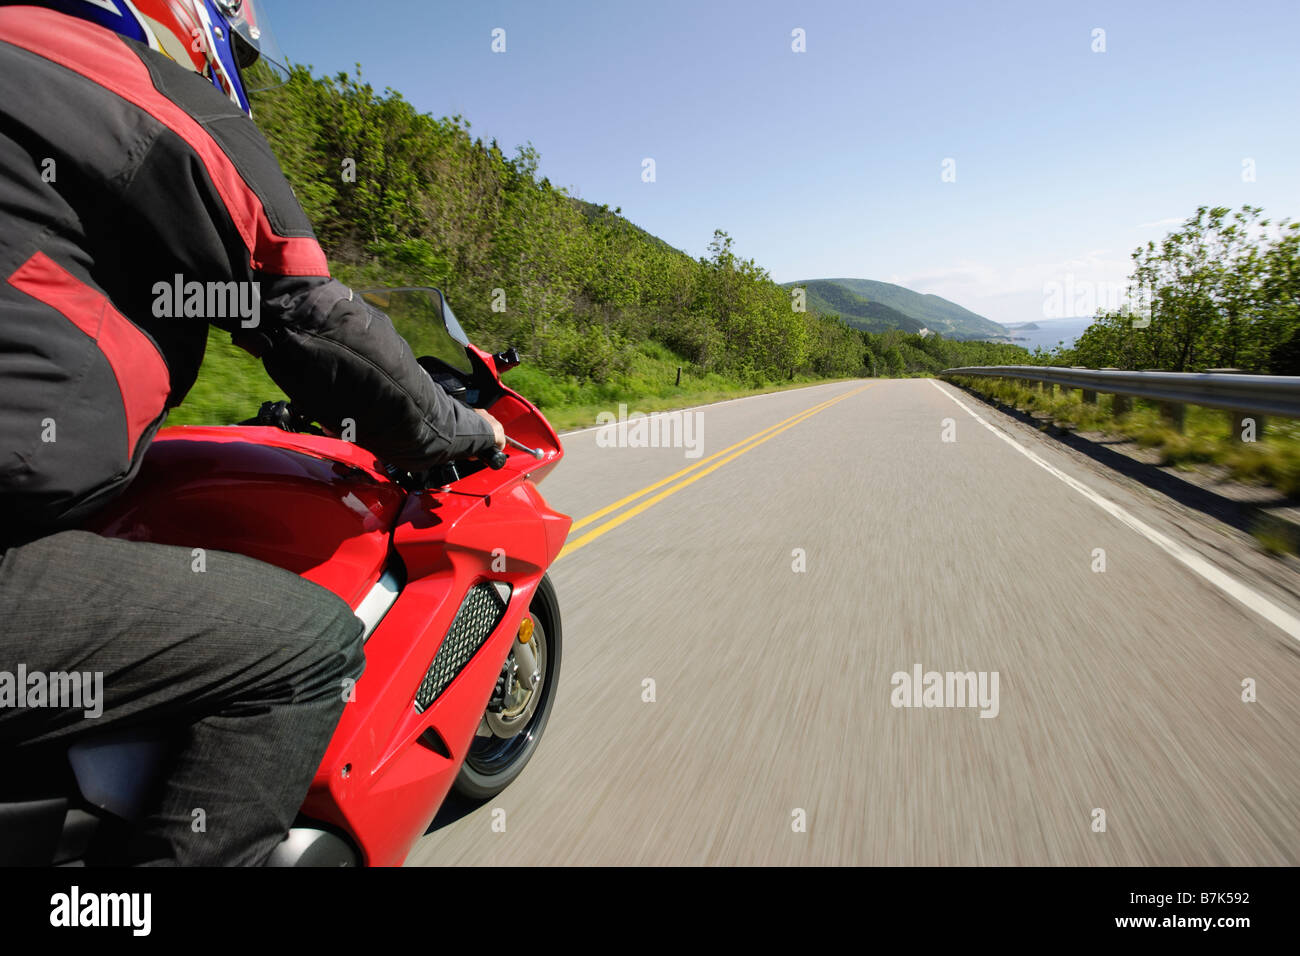 View on Motorcycle in action on Cabot Trail, Cape Breton Highlands National Park, Nova Scotia, Canada Stock Photo